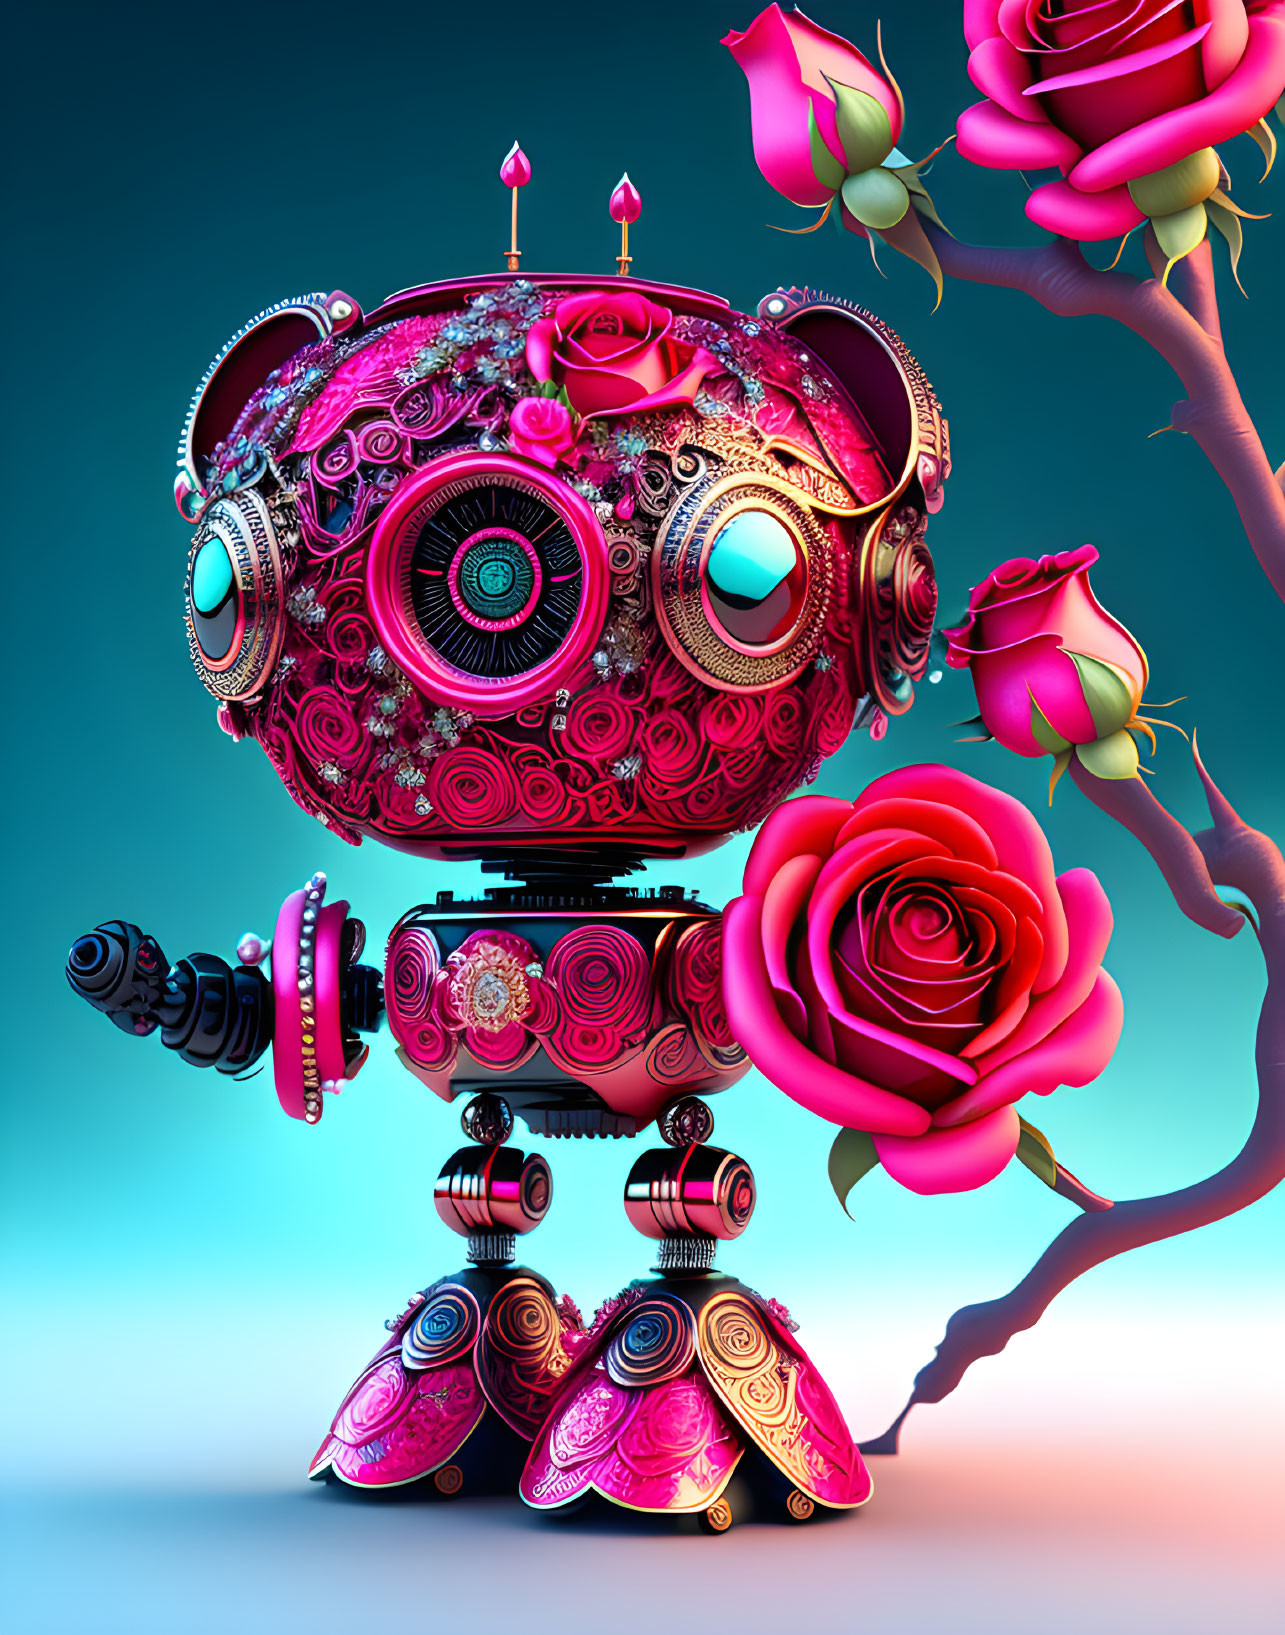 Colorful 3D robot with pink and black designs among pink roses